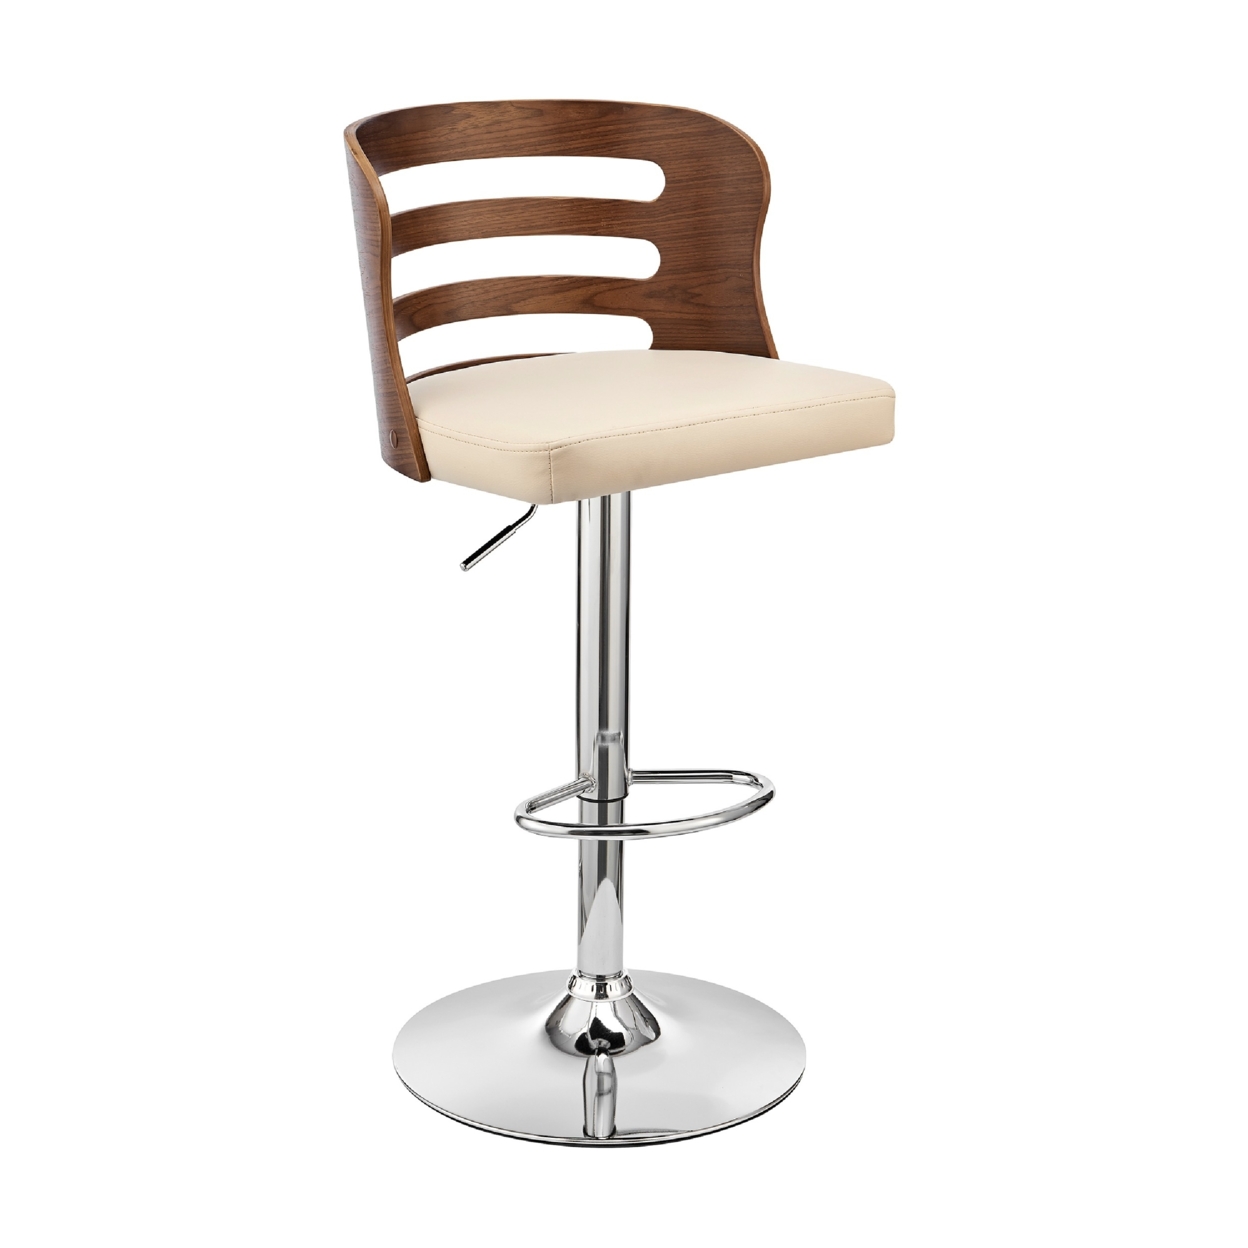 Adjustable Barstool With Curved Open Wooden Back, Brown And Cream- Saltoro Sherpi